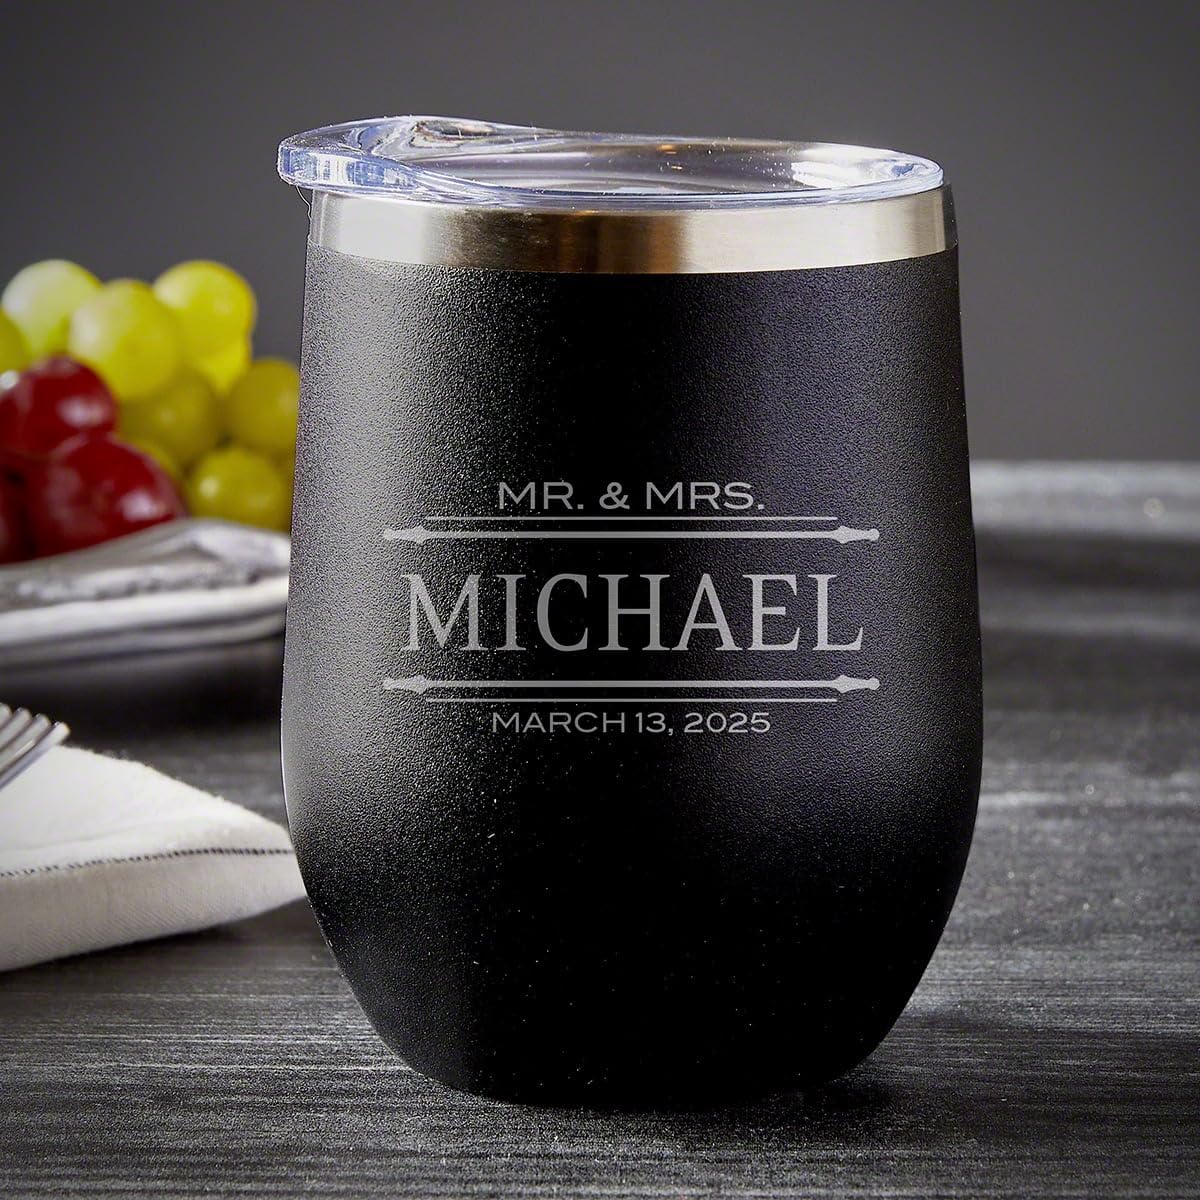 HomeWetBar Oakmont Engraved Stainless Steel Wine Tumblers - Set of 2